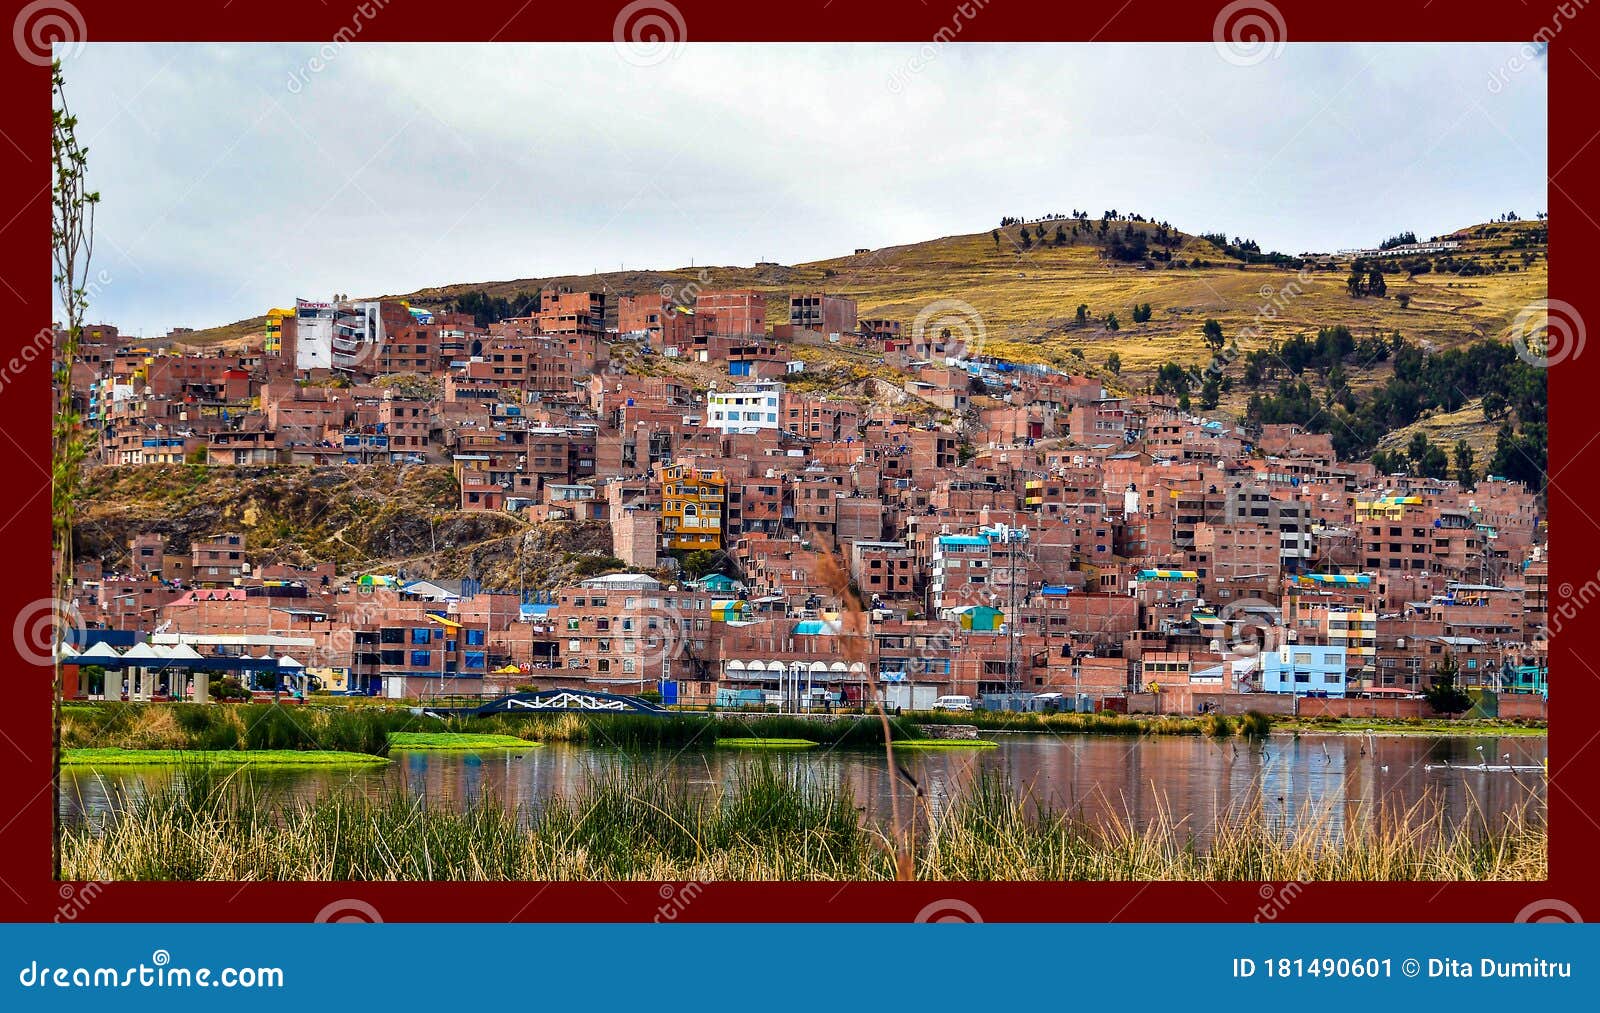 puno view from lake titicaca